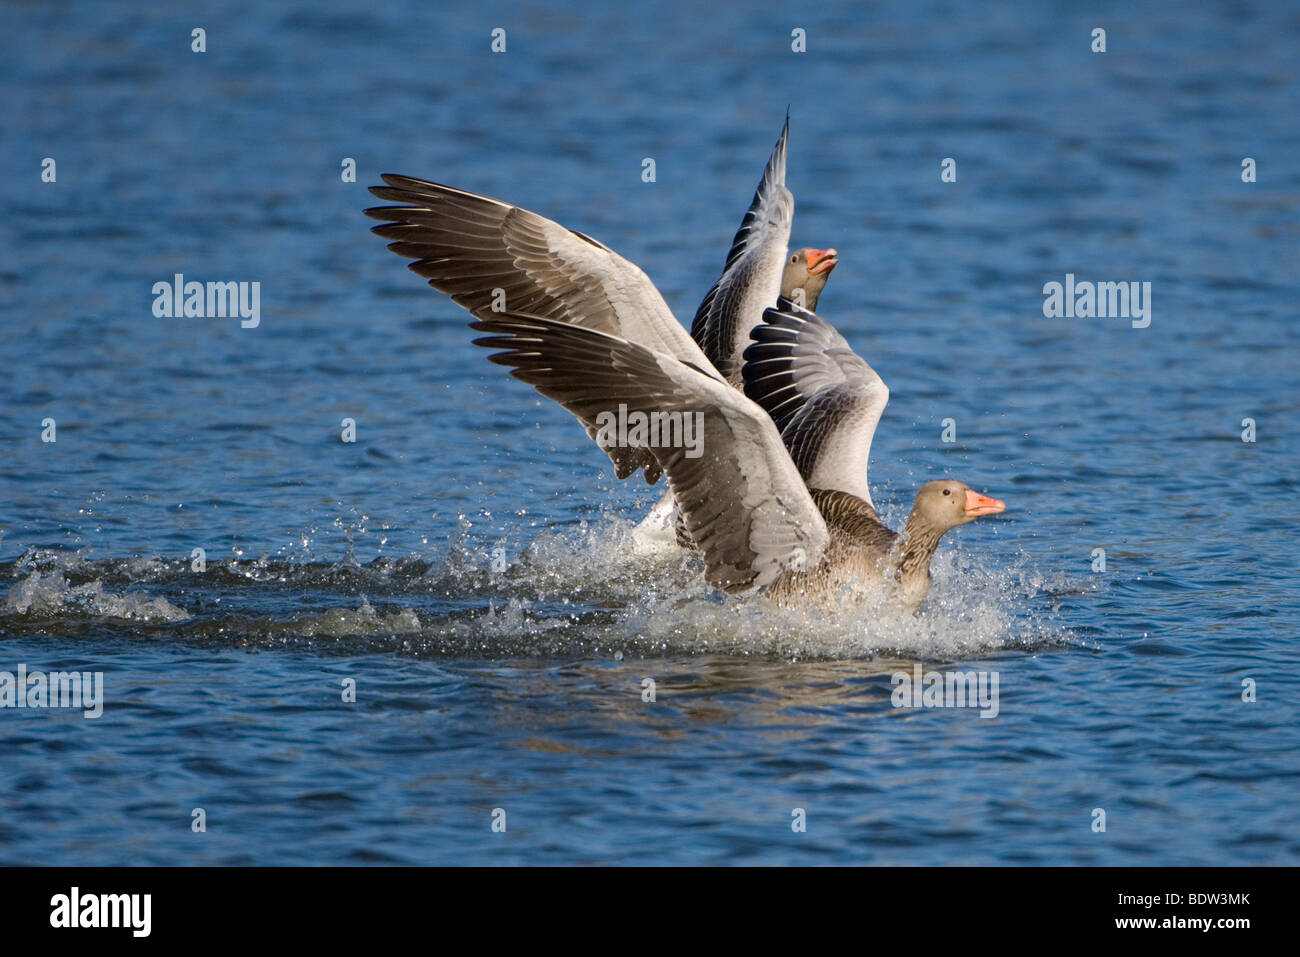 A greylag goose in landing in the water Stock Photo